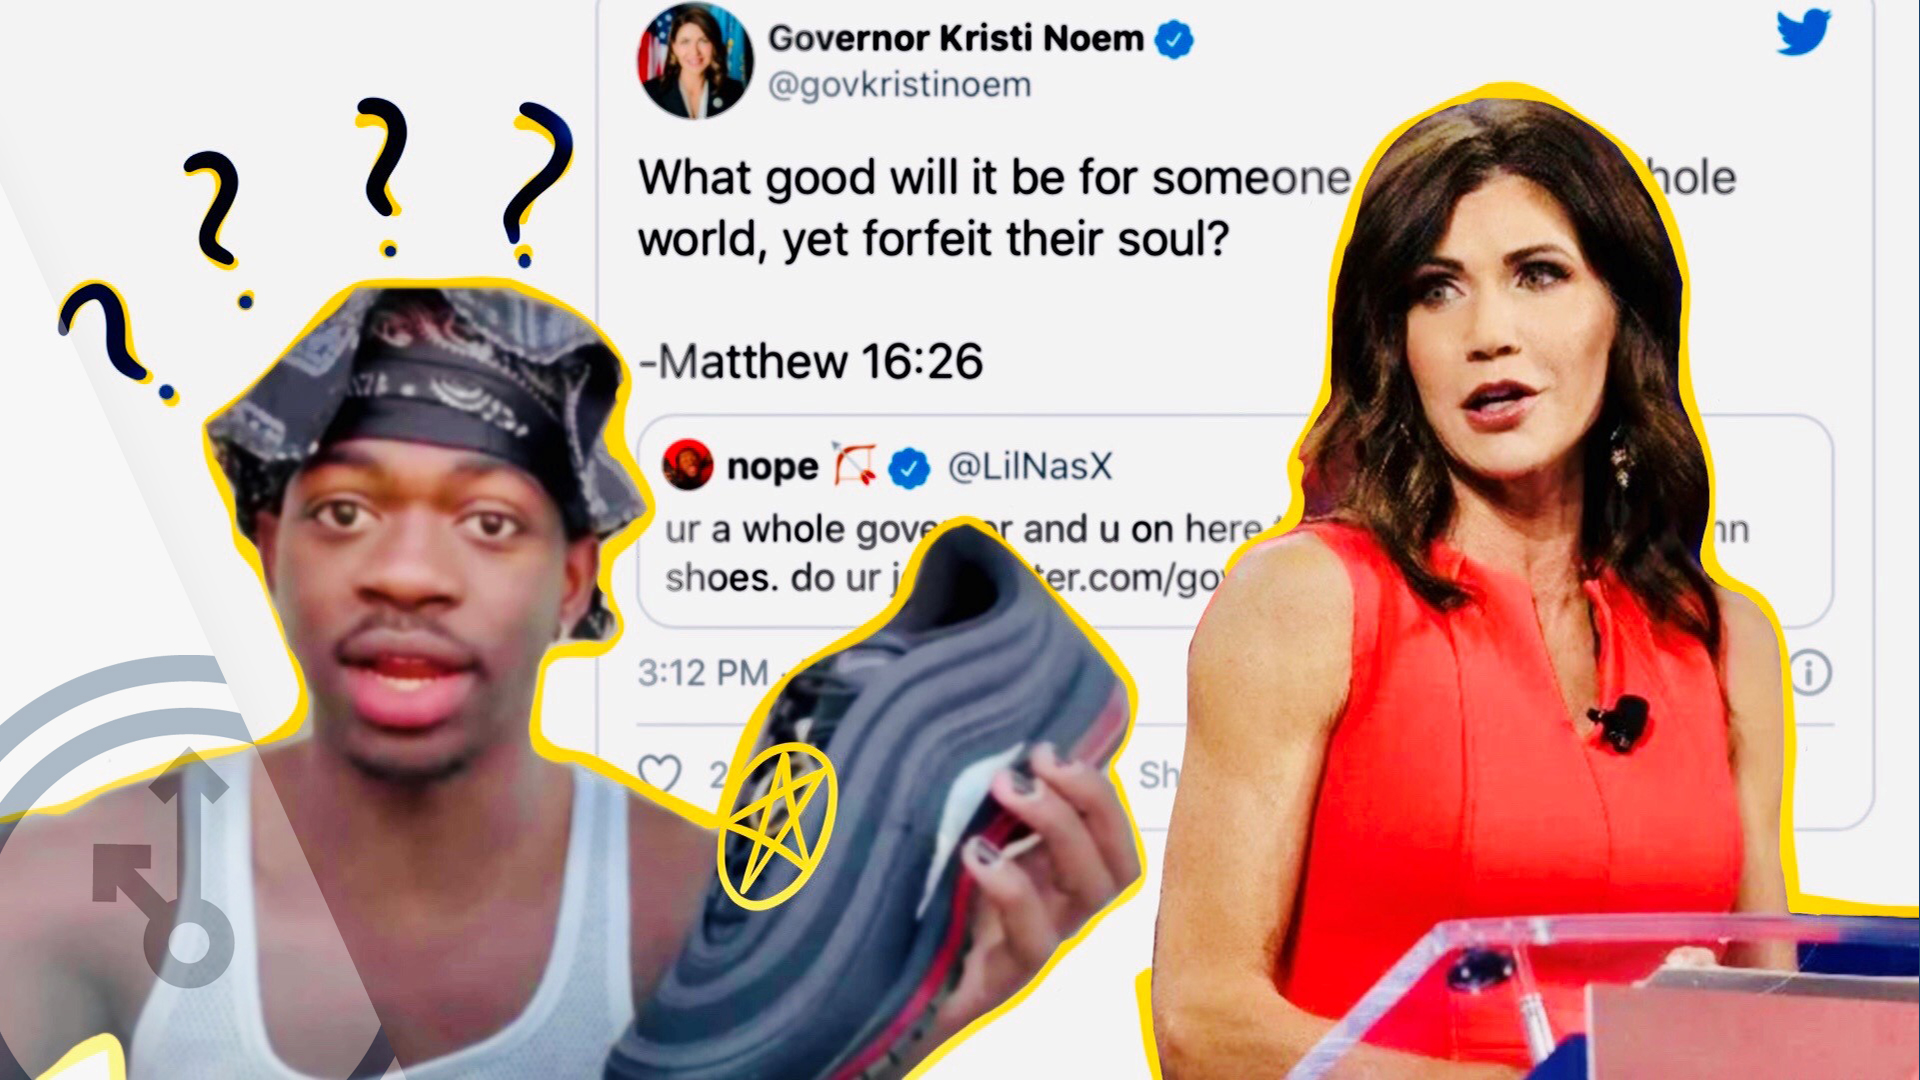 The Political Strategy Behind Noem's Twitter Fight With Lil Nas X 